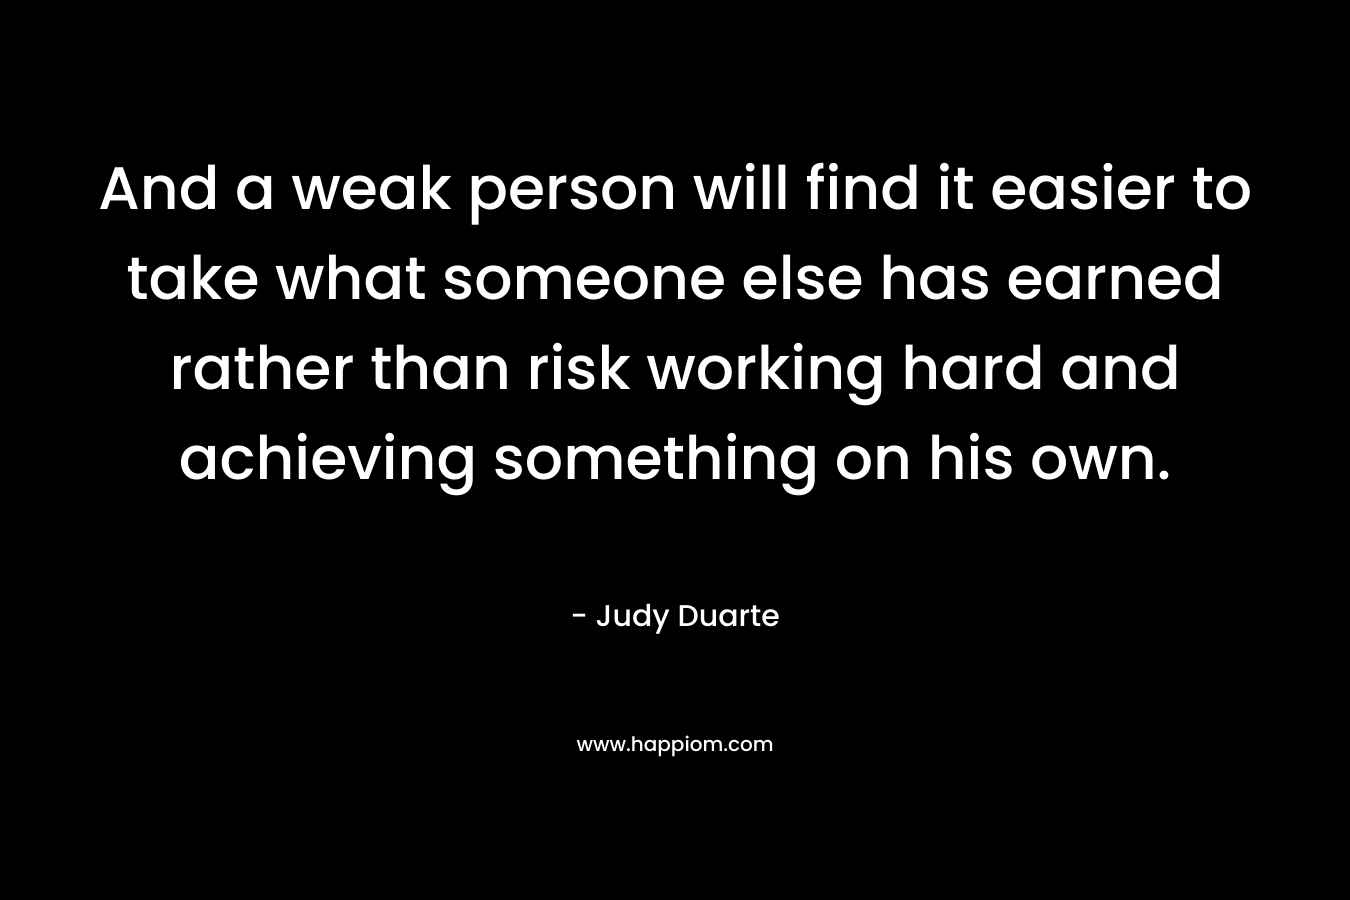 And a weak person will find it easier to take what someone else has earned rather than risk working hard and achieving something on his own.